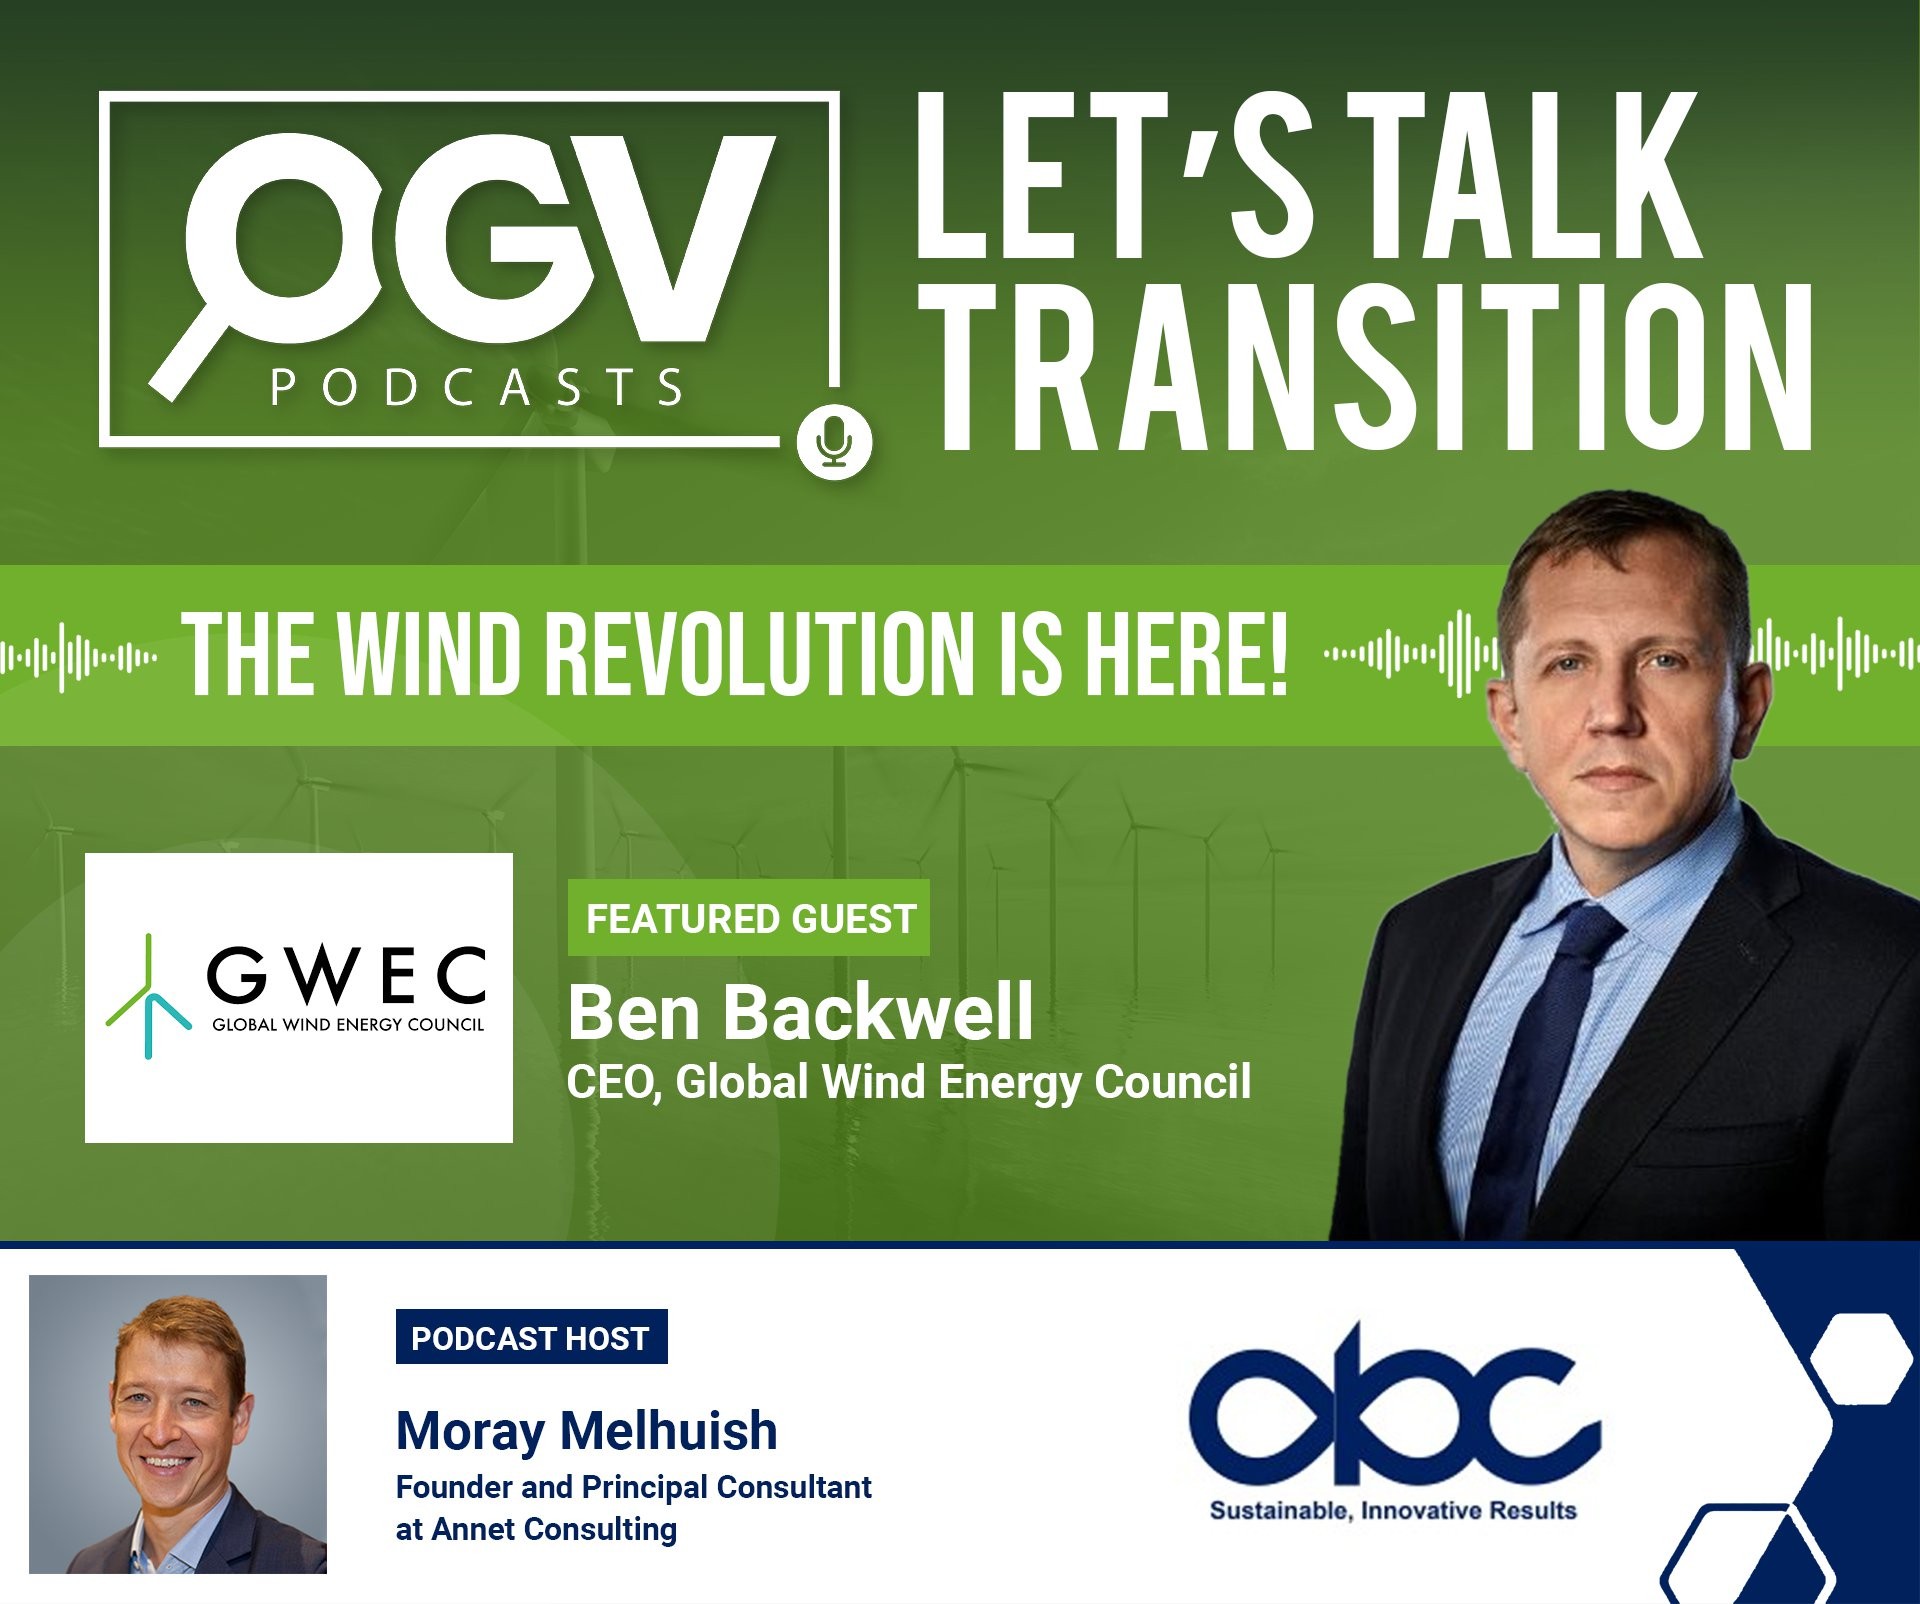 The wind revolution is here!